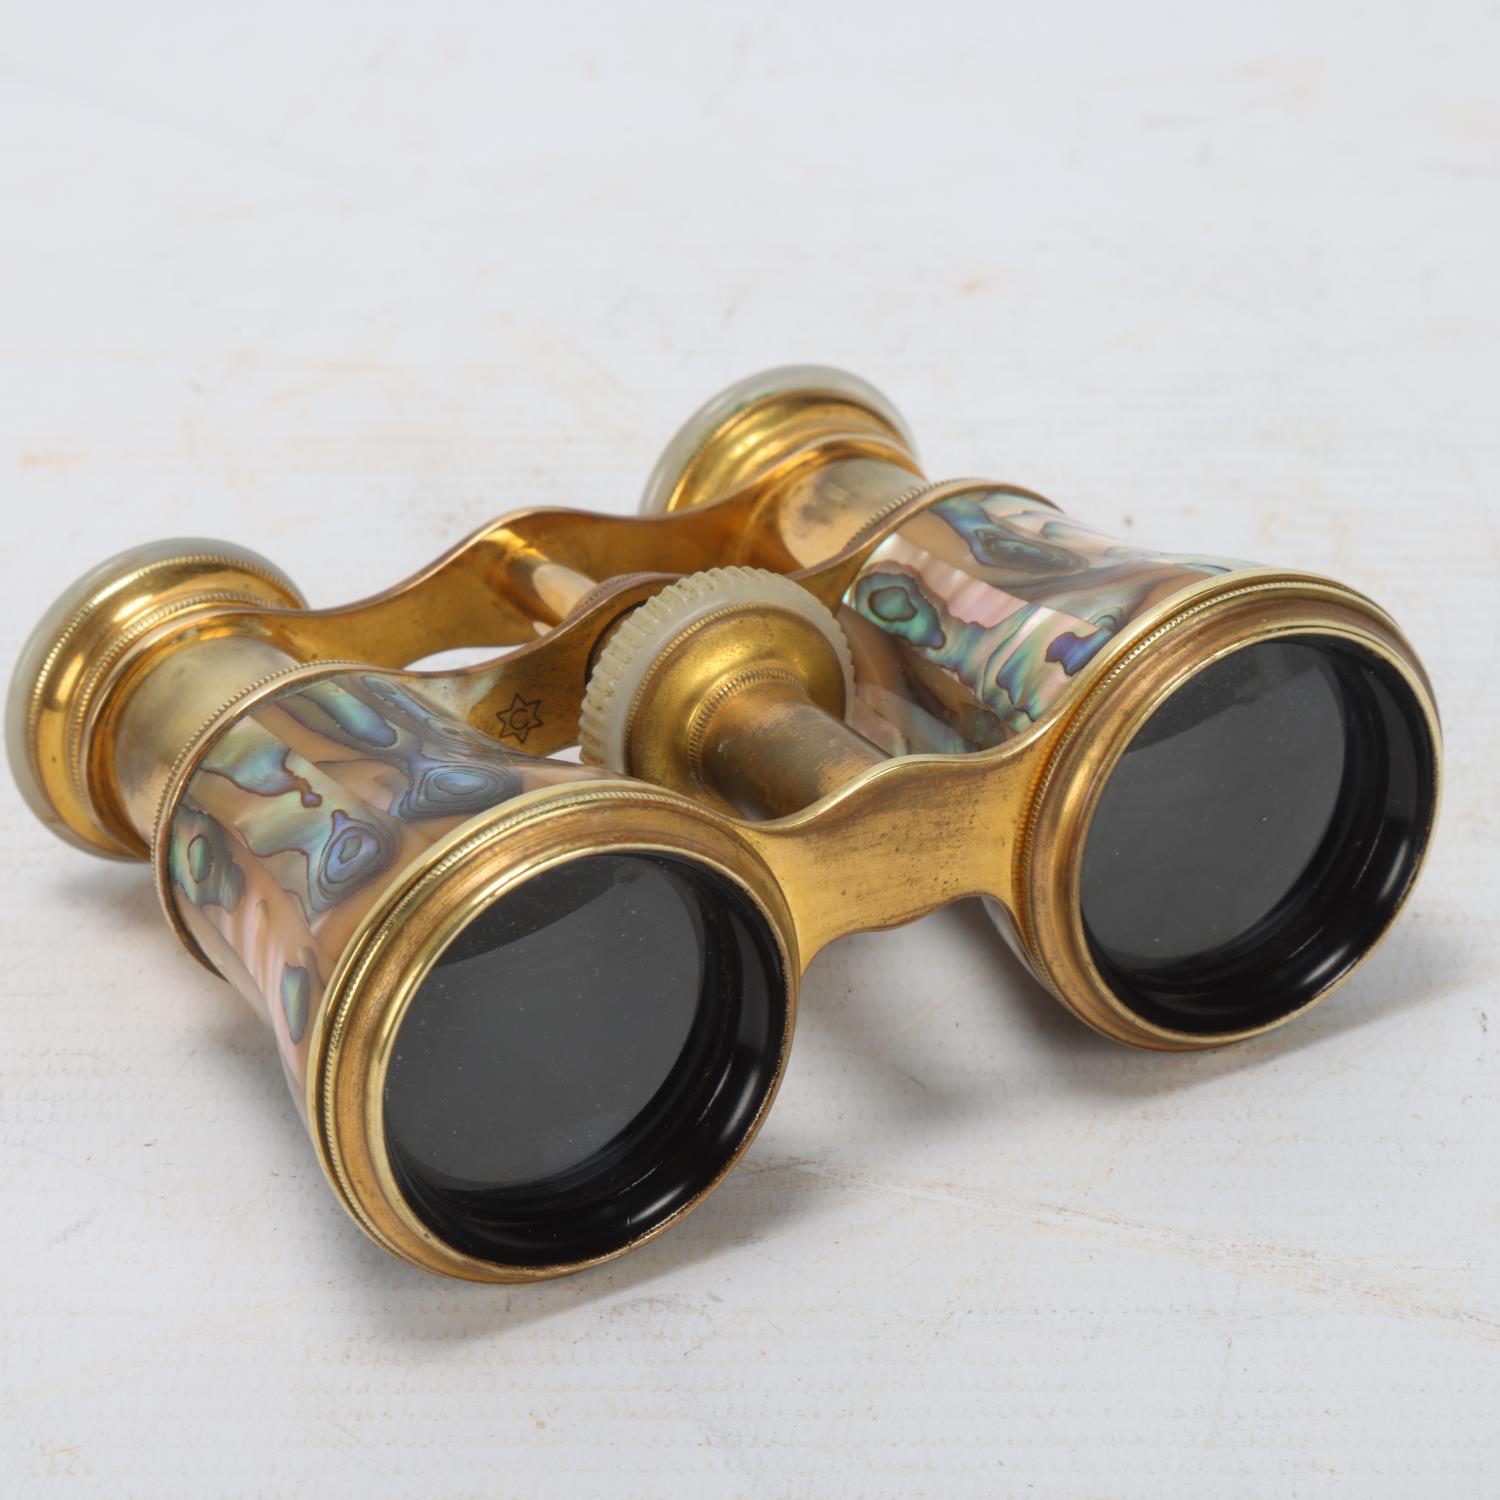 Pair of 19th century gilt-brass and abalone opera glasses Good condition, no damage - Image 3 of 3